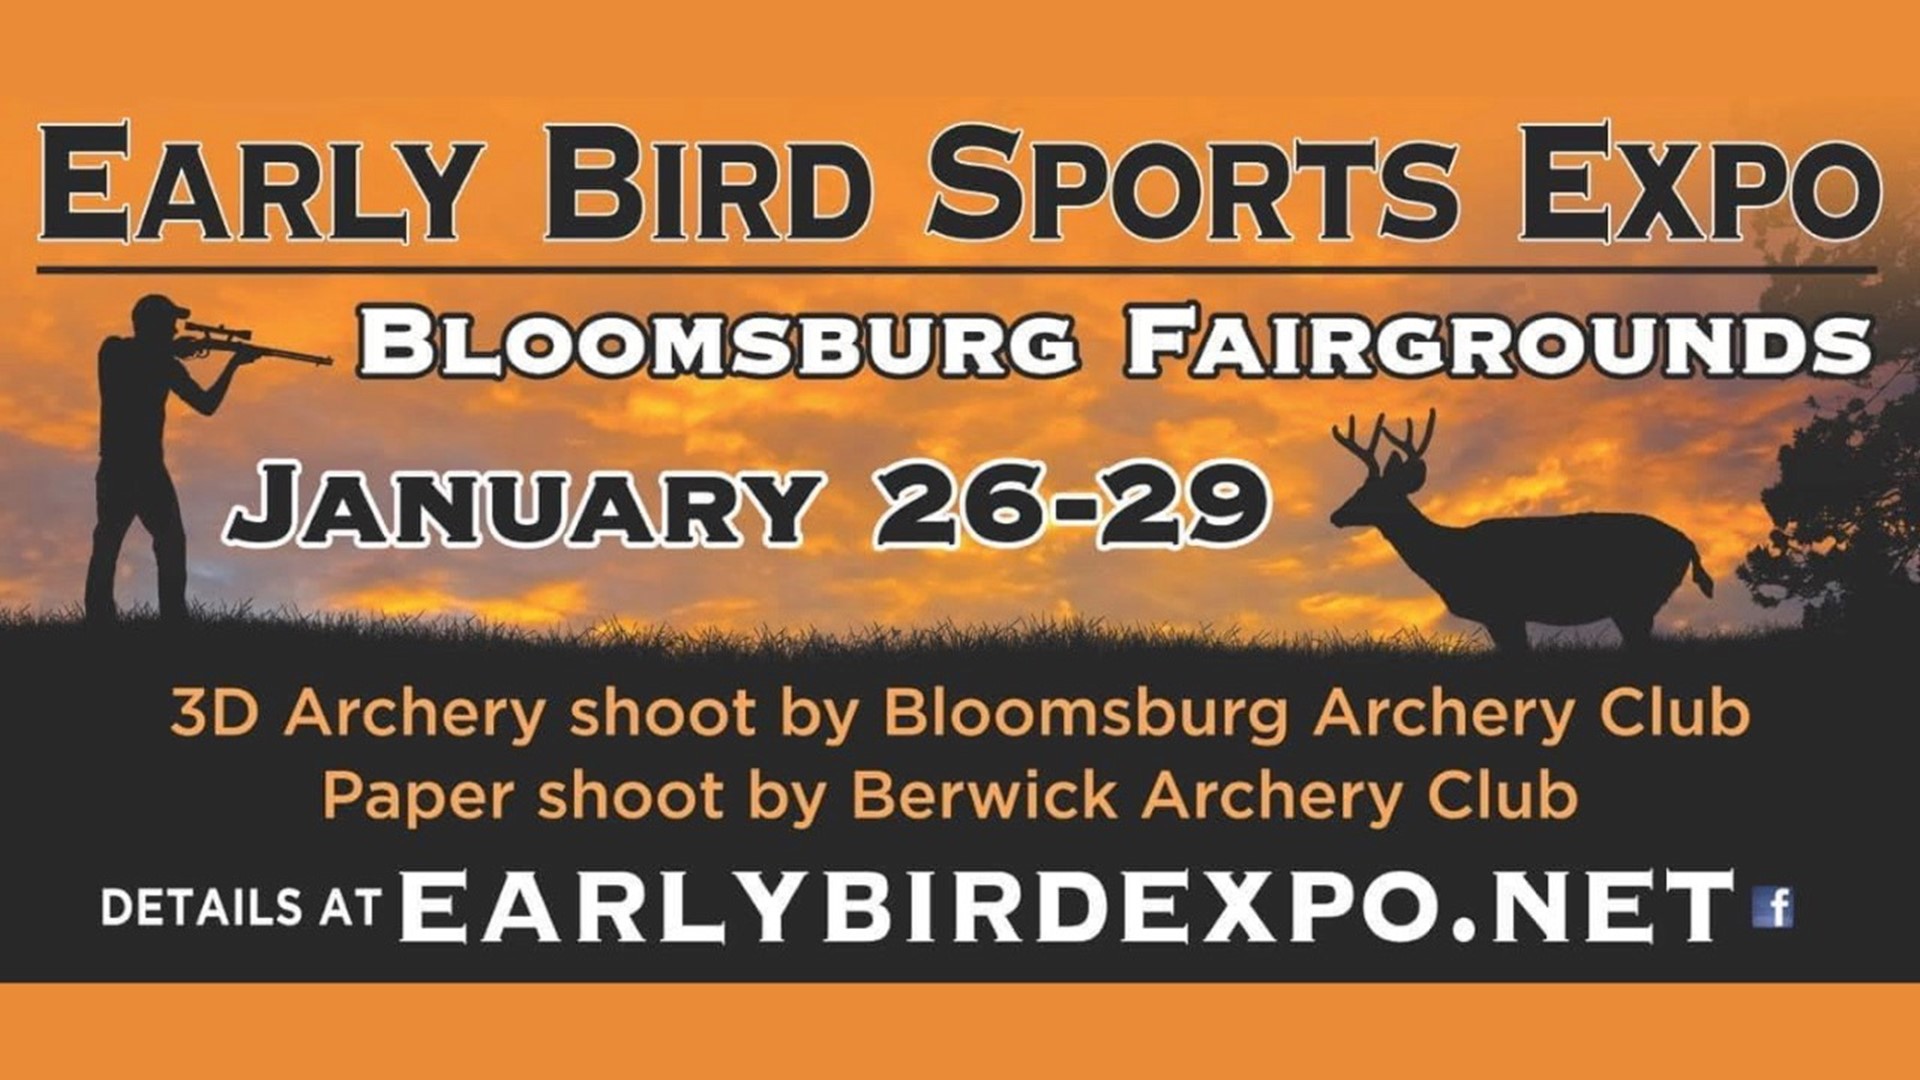 Break cabin fever at the Early Bird Sports Expo